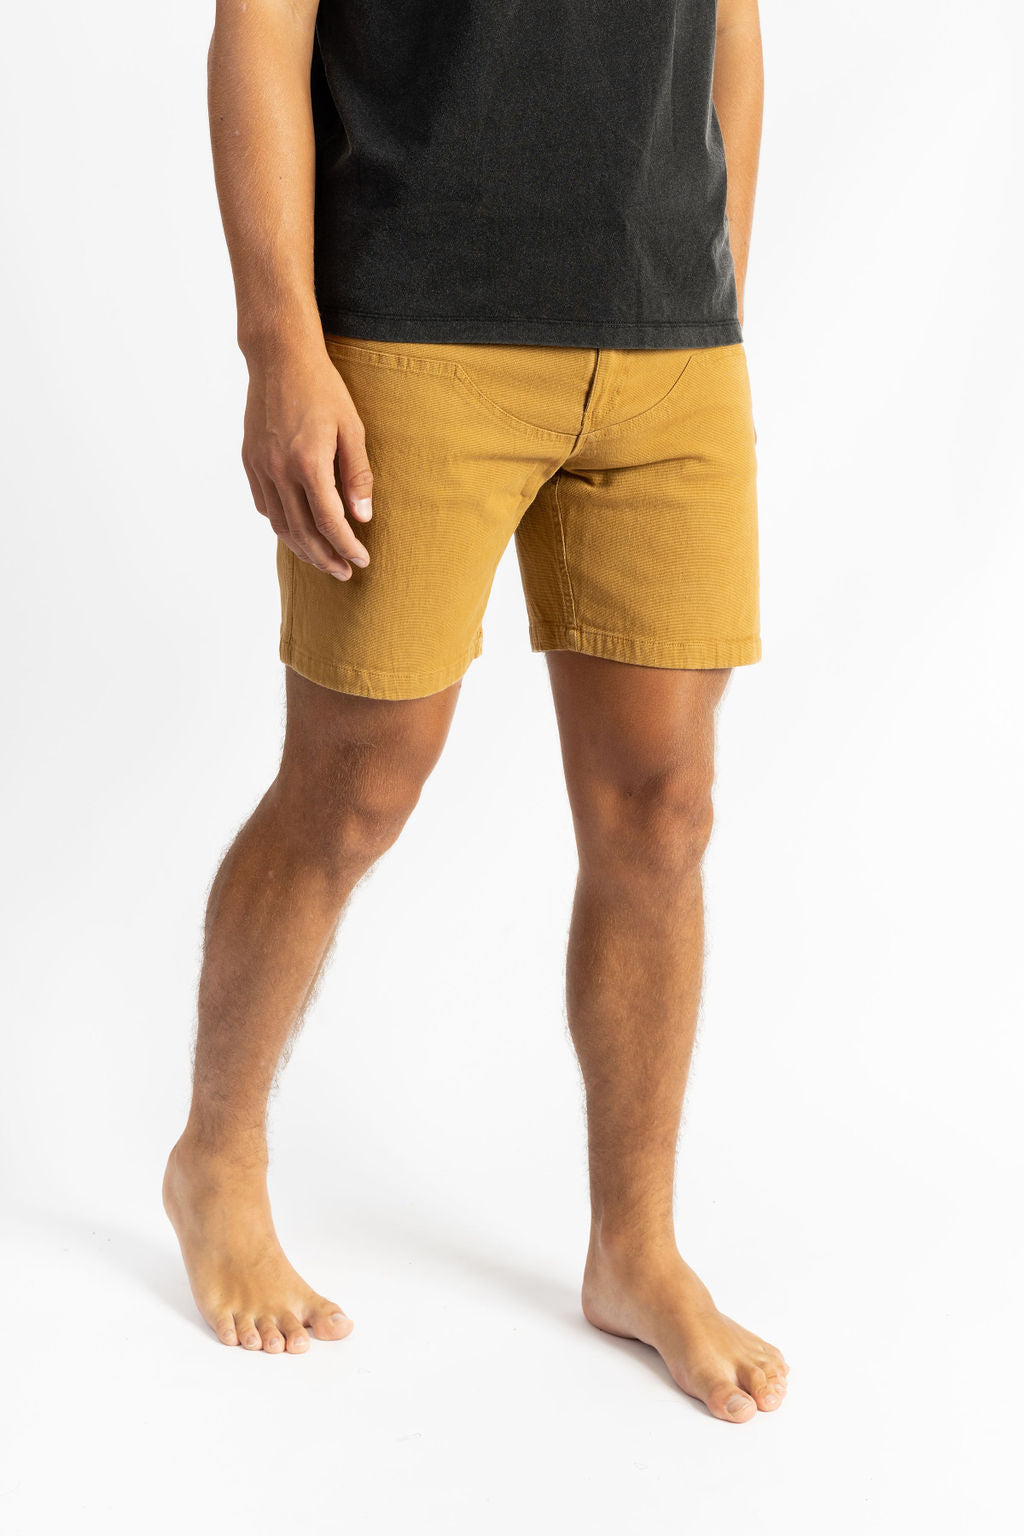 A man wearing a Sand color work short